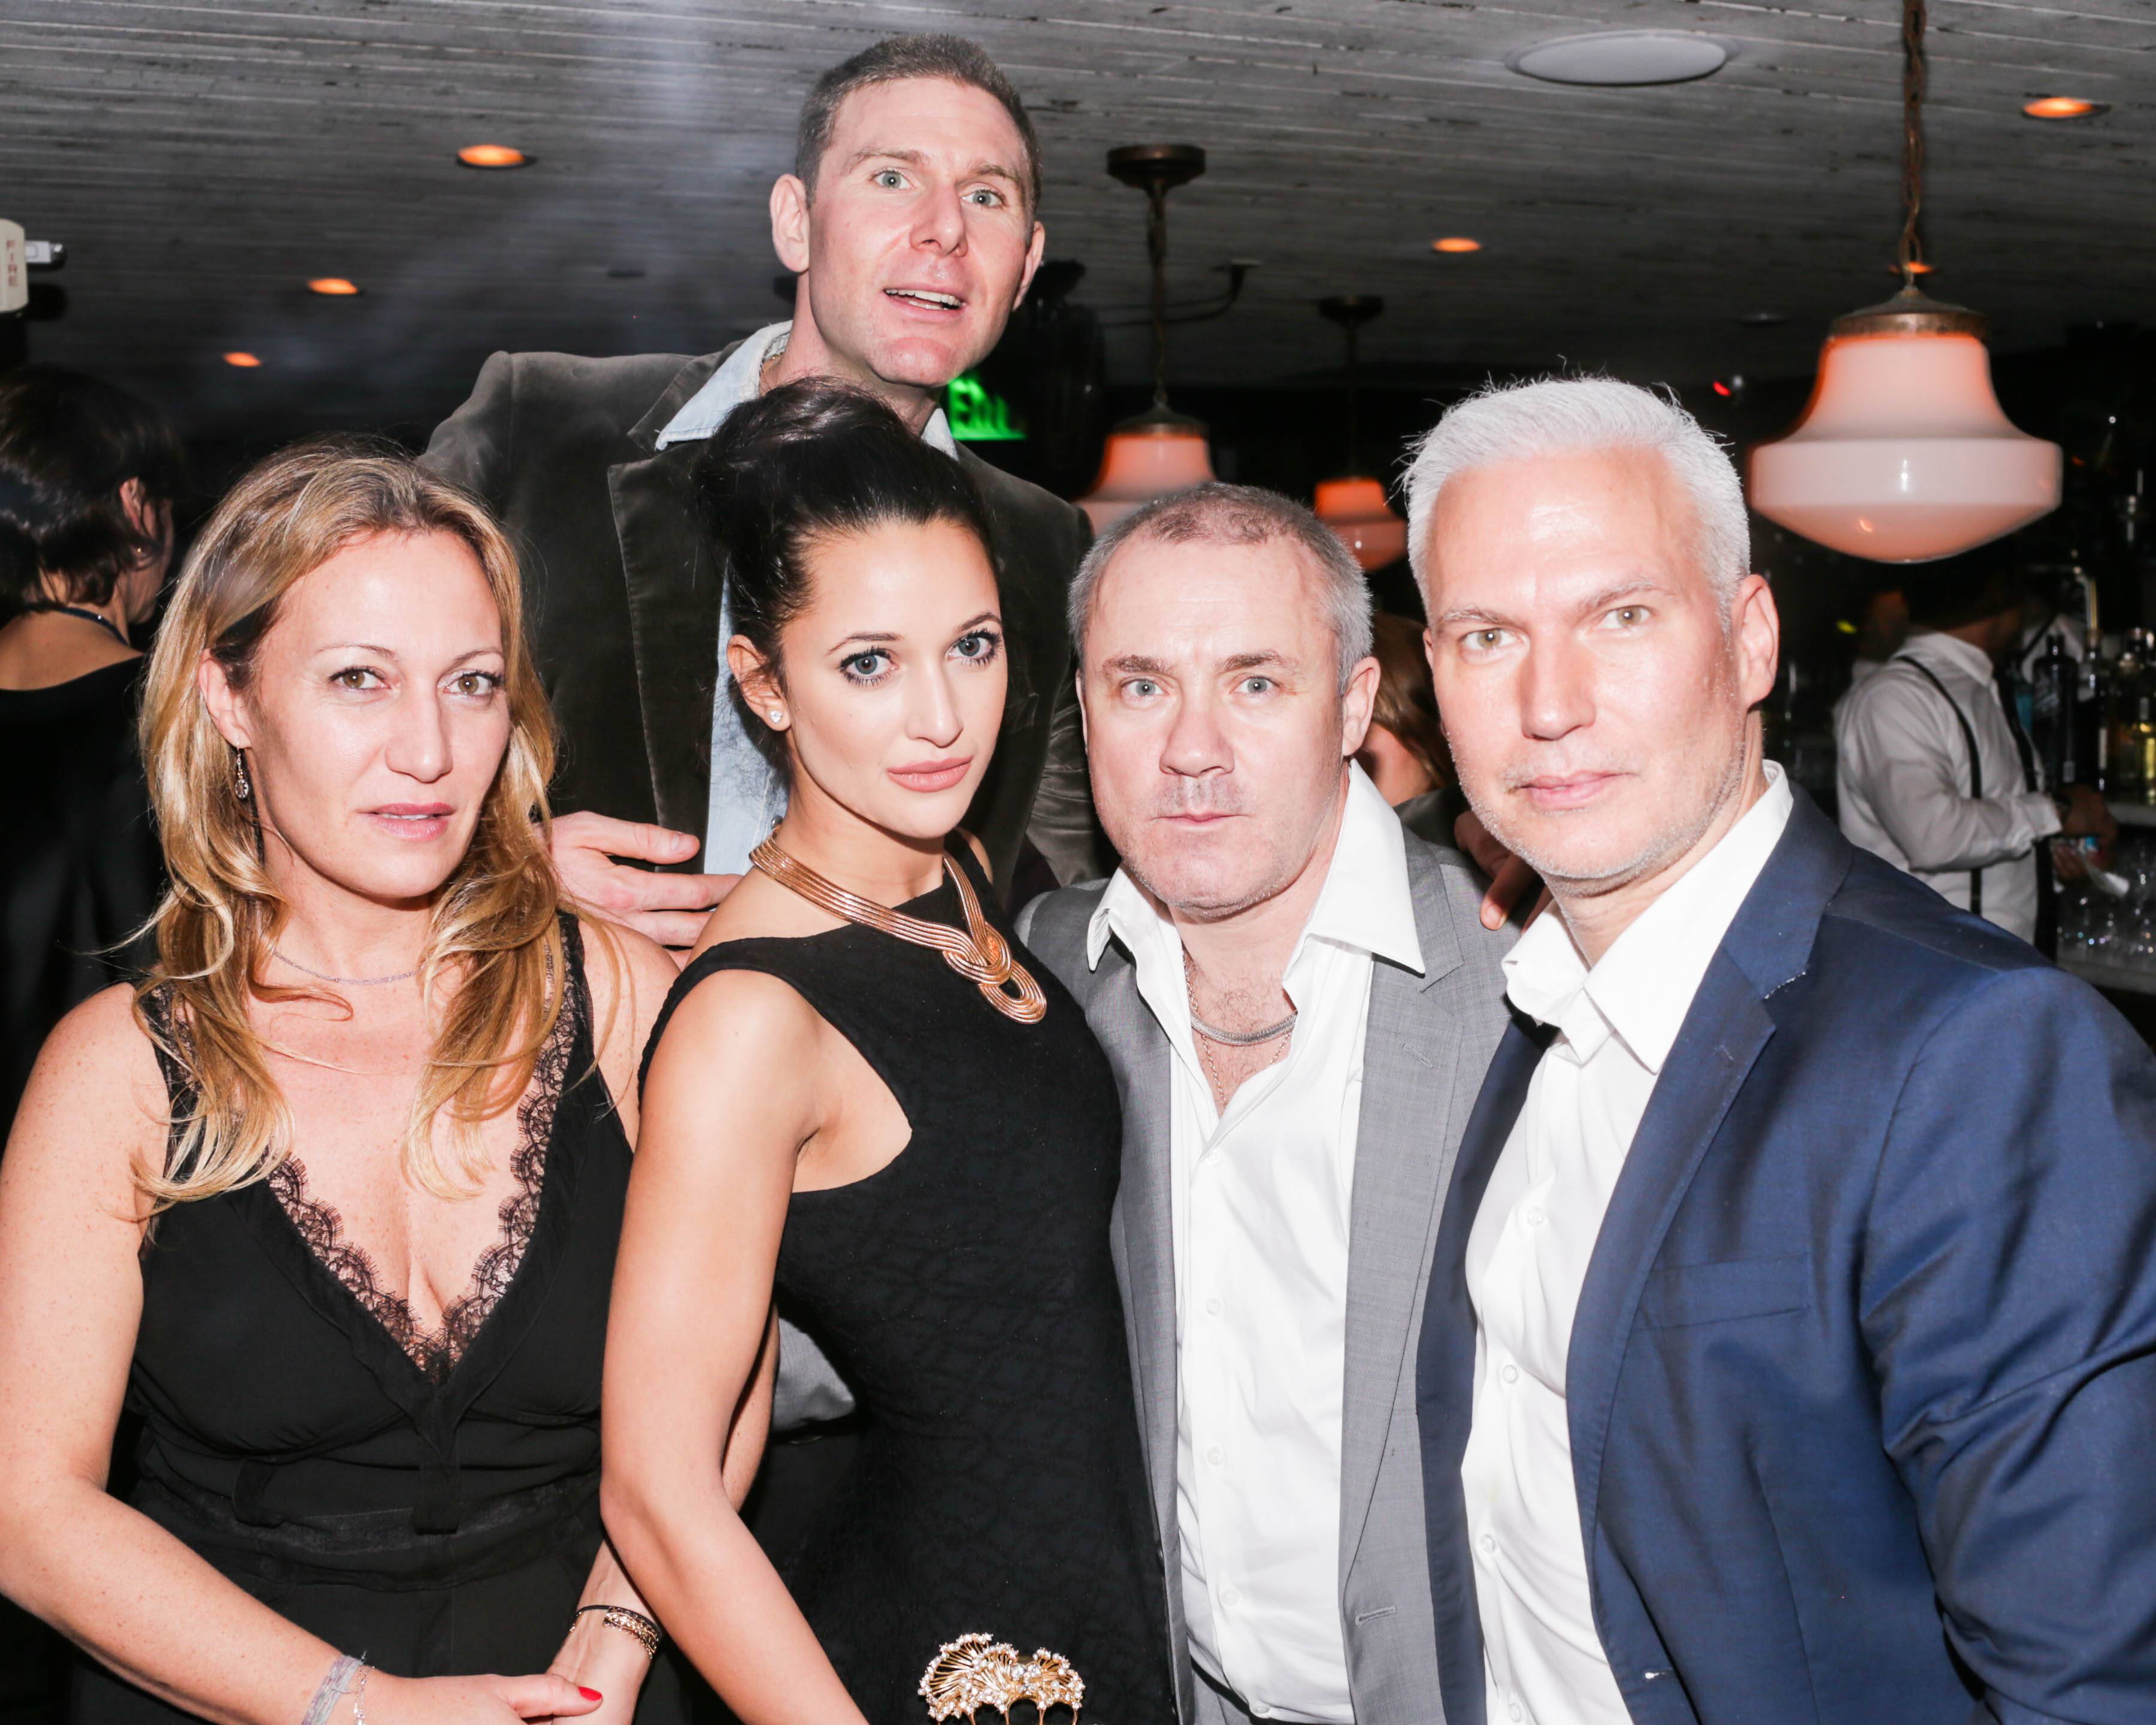 CHANEL presents a Beachside Barbecue hosted by Art.sy founder Carter Cleveland, Larry Gagosian, Wendi Murdoch, Peter Thiel and Dasha Zhukova